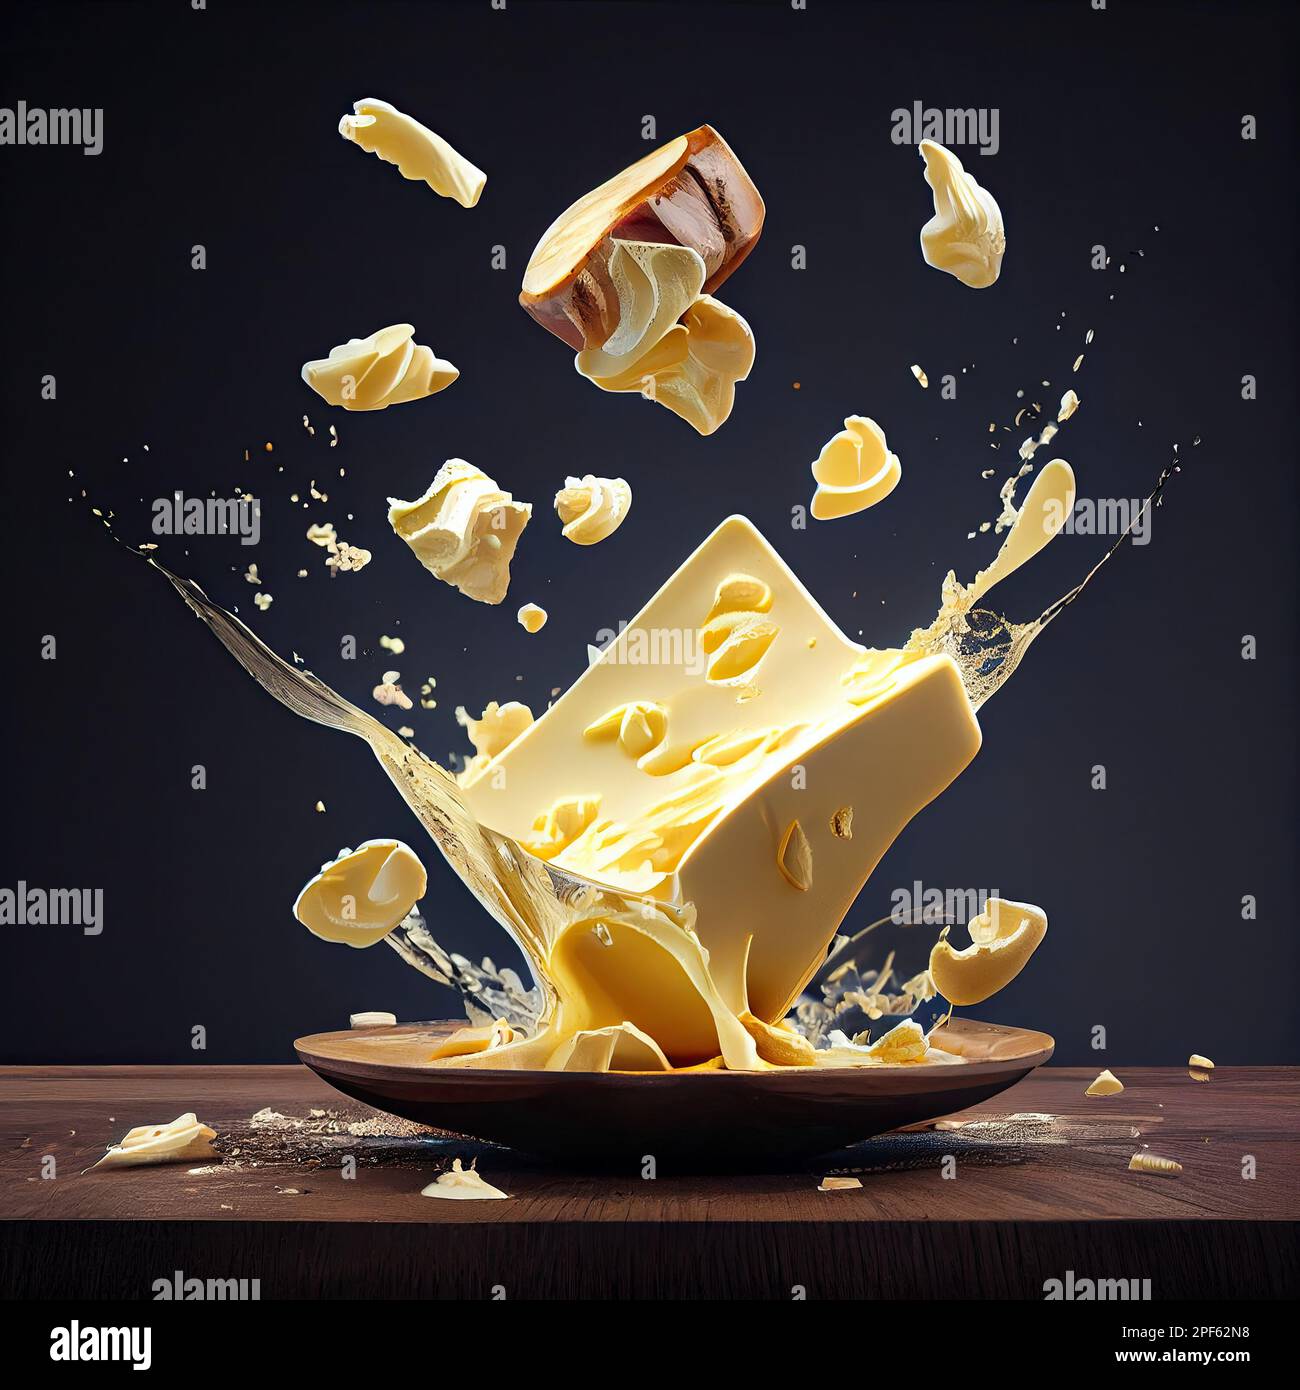 cheese falling into a bowl on a table with milk and chocolate splashing out from the top to the bottom Stock Photo